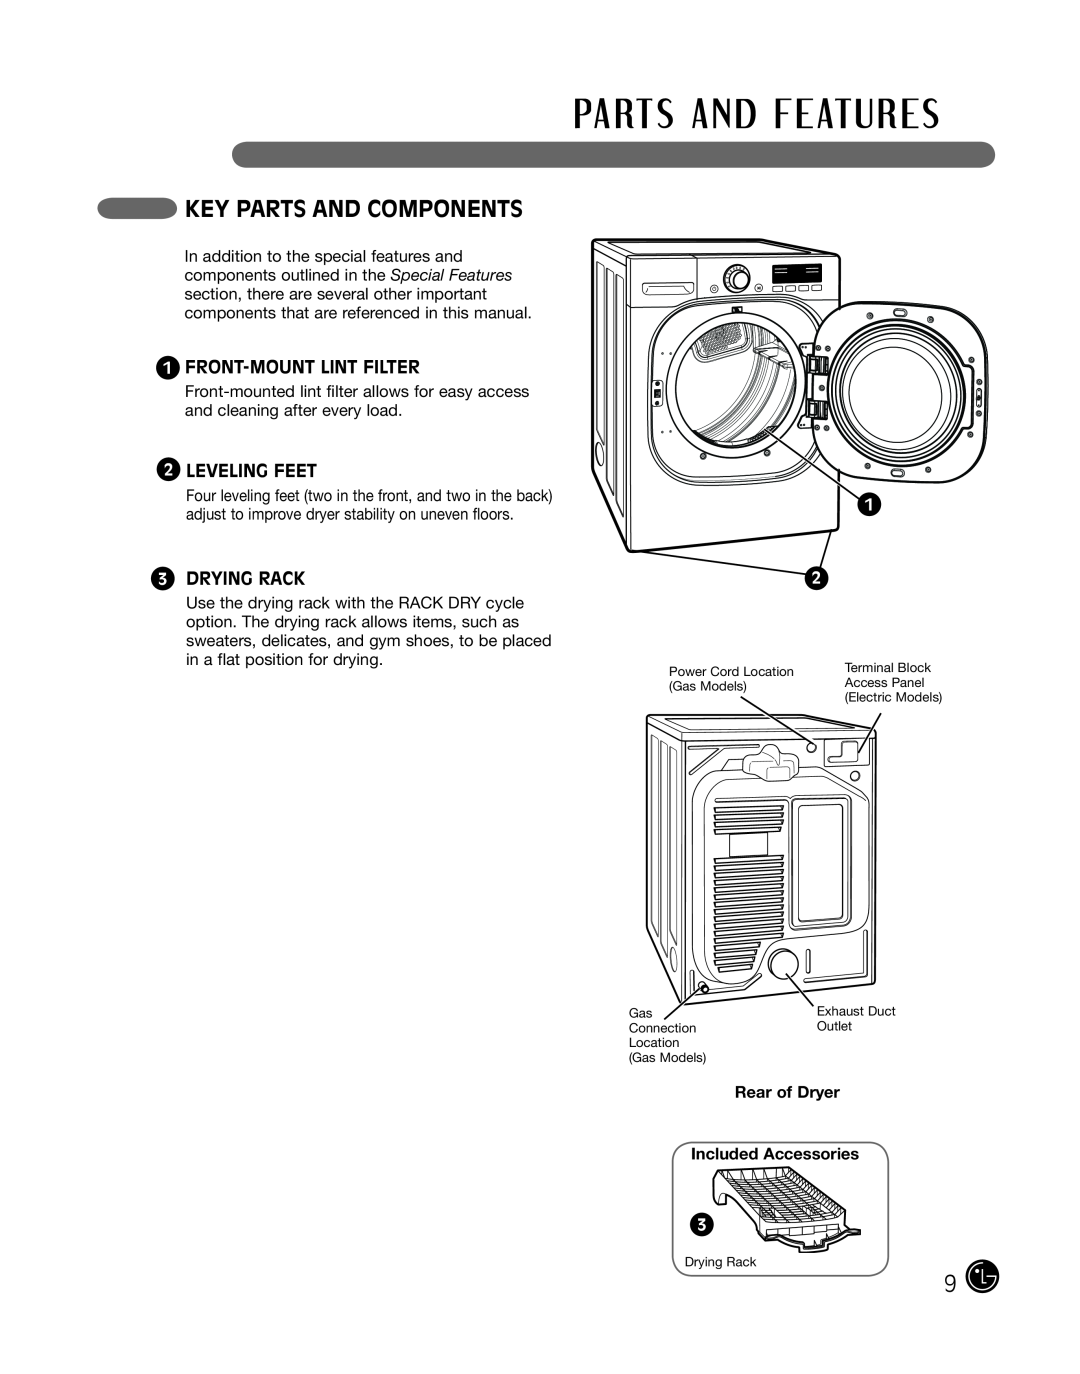 LG Electronics P154 manual Key Parts And Components, Leveling Feet, Drying Rack 